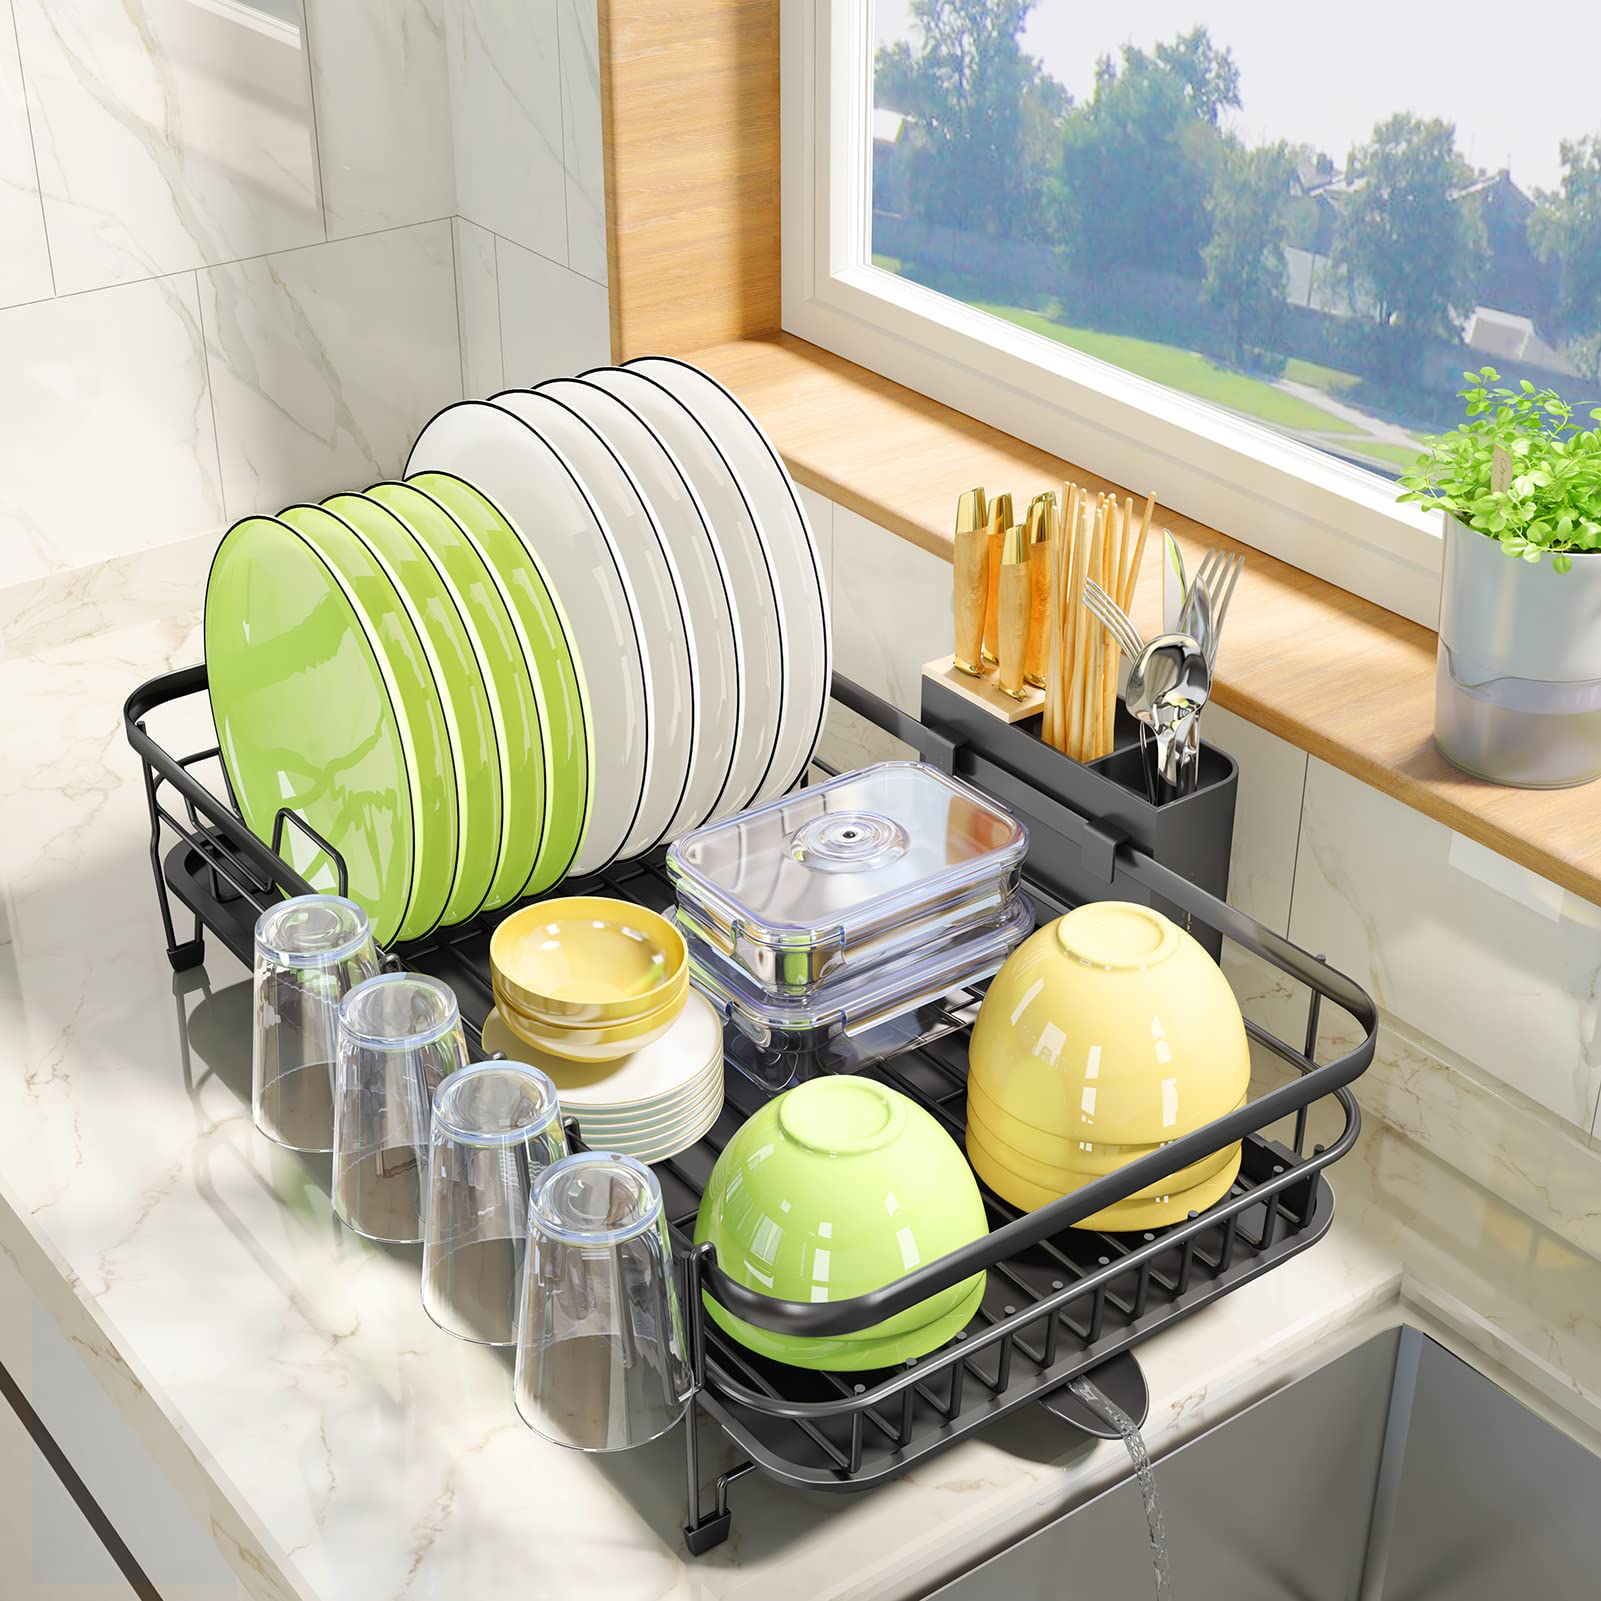 PXRAcK Dish Drying Rack, Expandable(128-215) Dish Rack with Utensil Holder  cup Holder, Stainless Steel Dish Rack and Drainboard